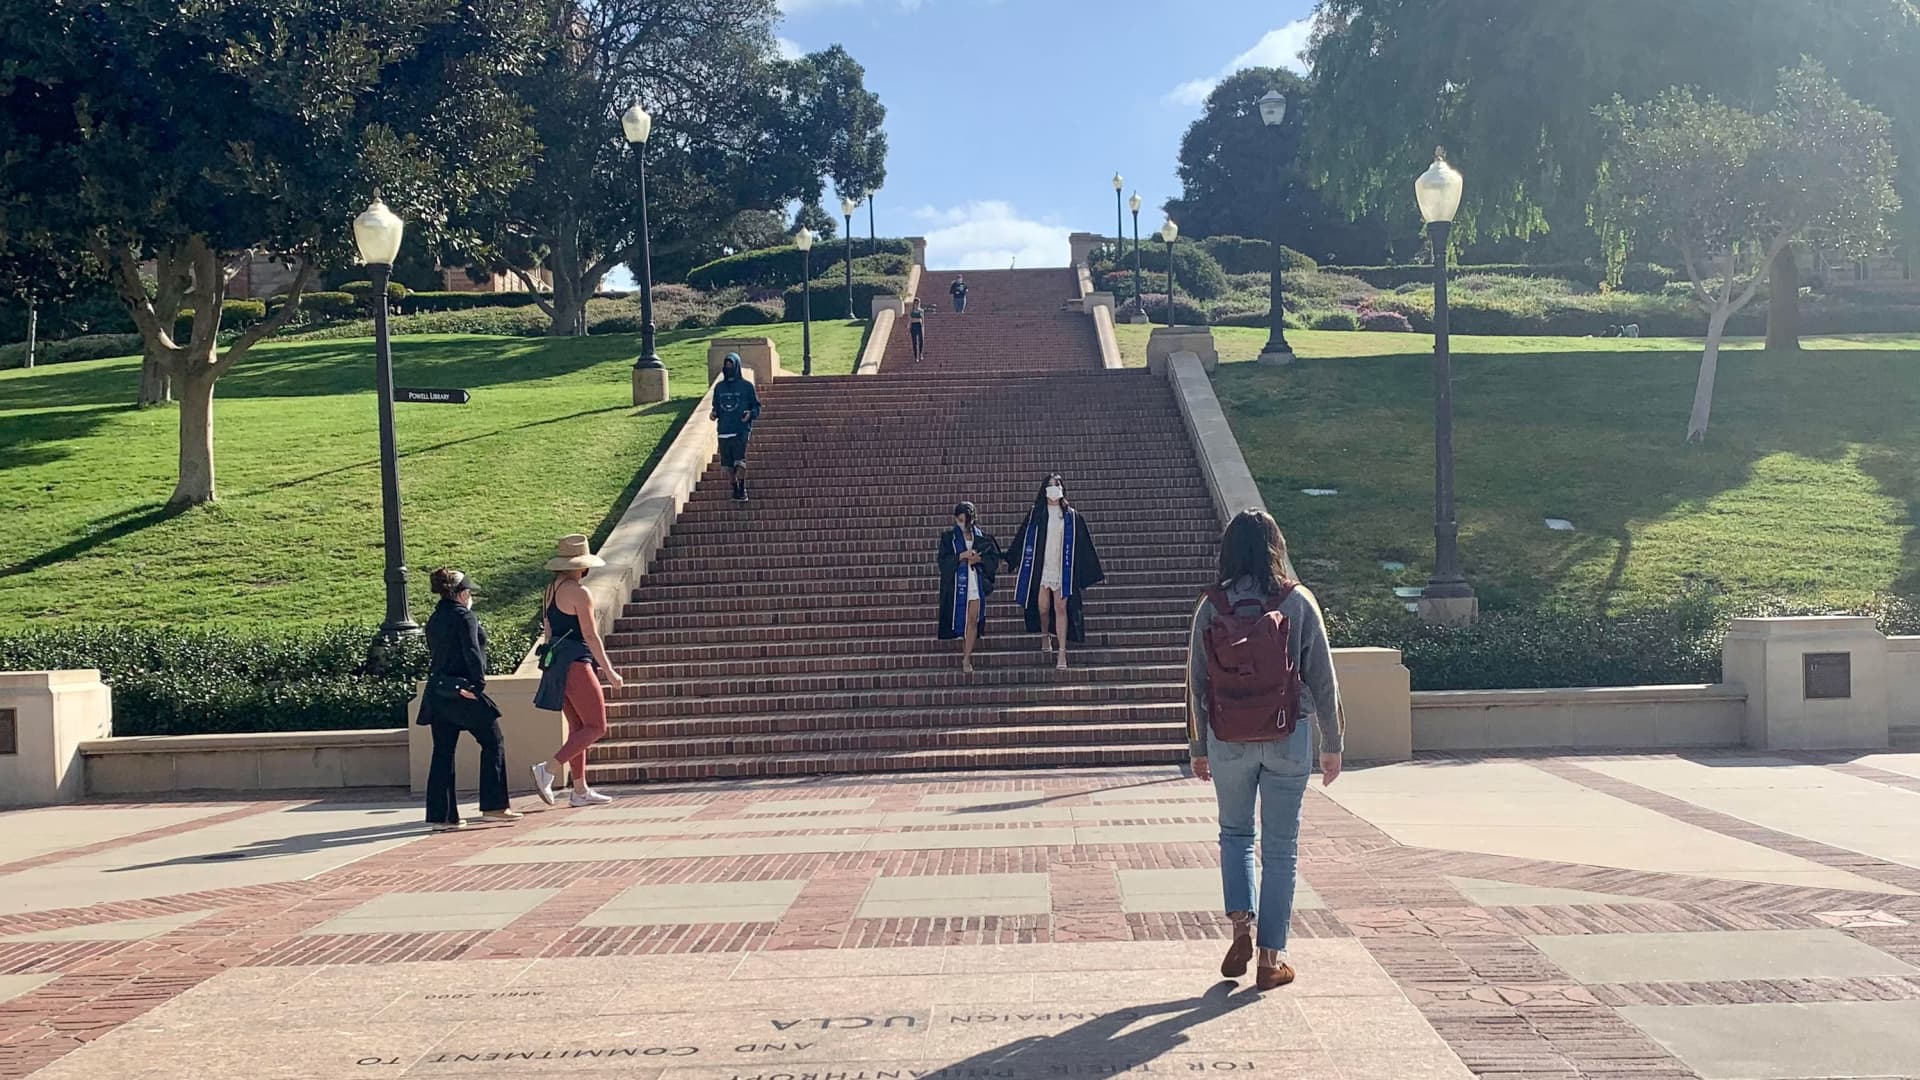 Students walk around Wilson Plaza on the UCLA campus in Los Angeles, Calif.